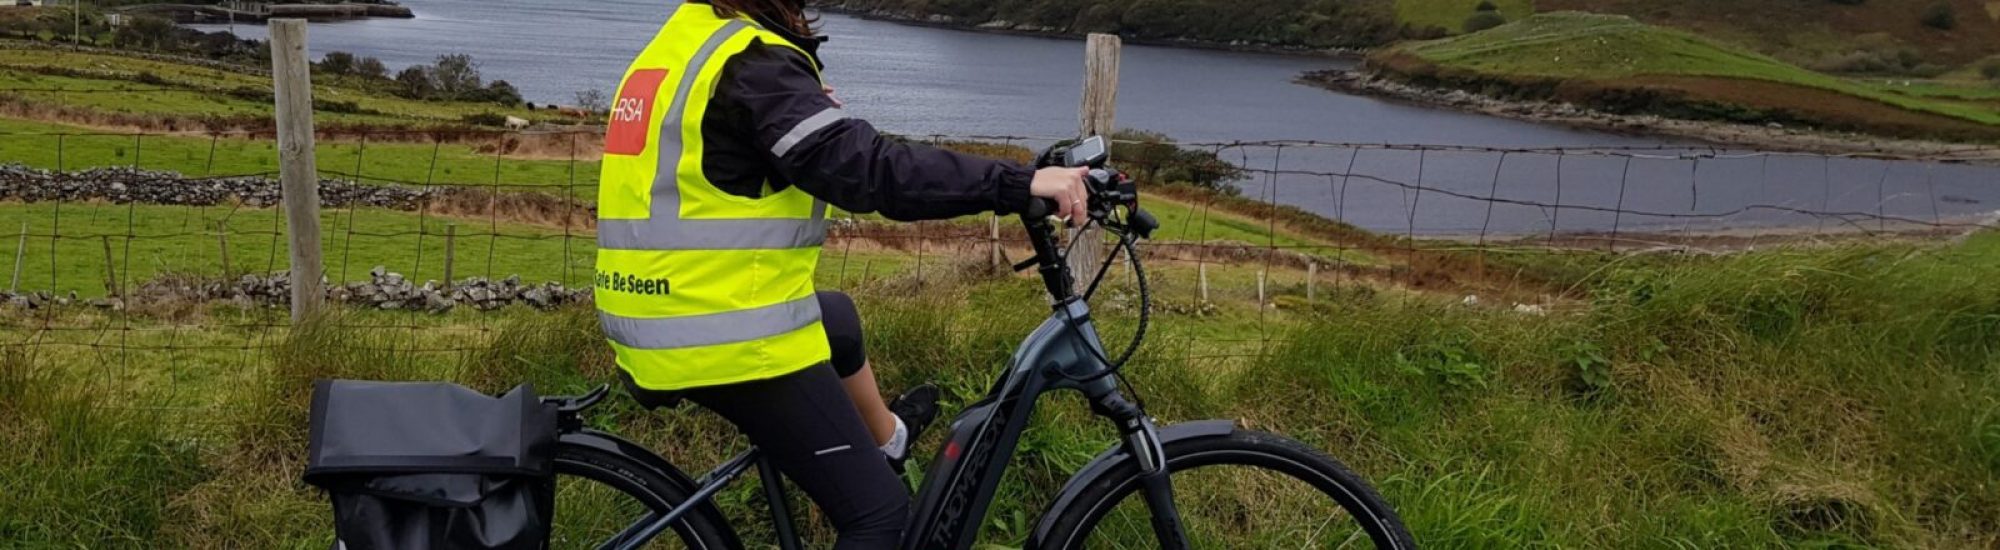 Cycling Donegal Cost with E-bke